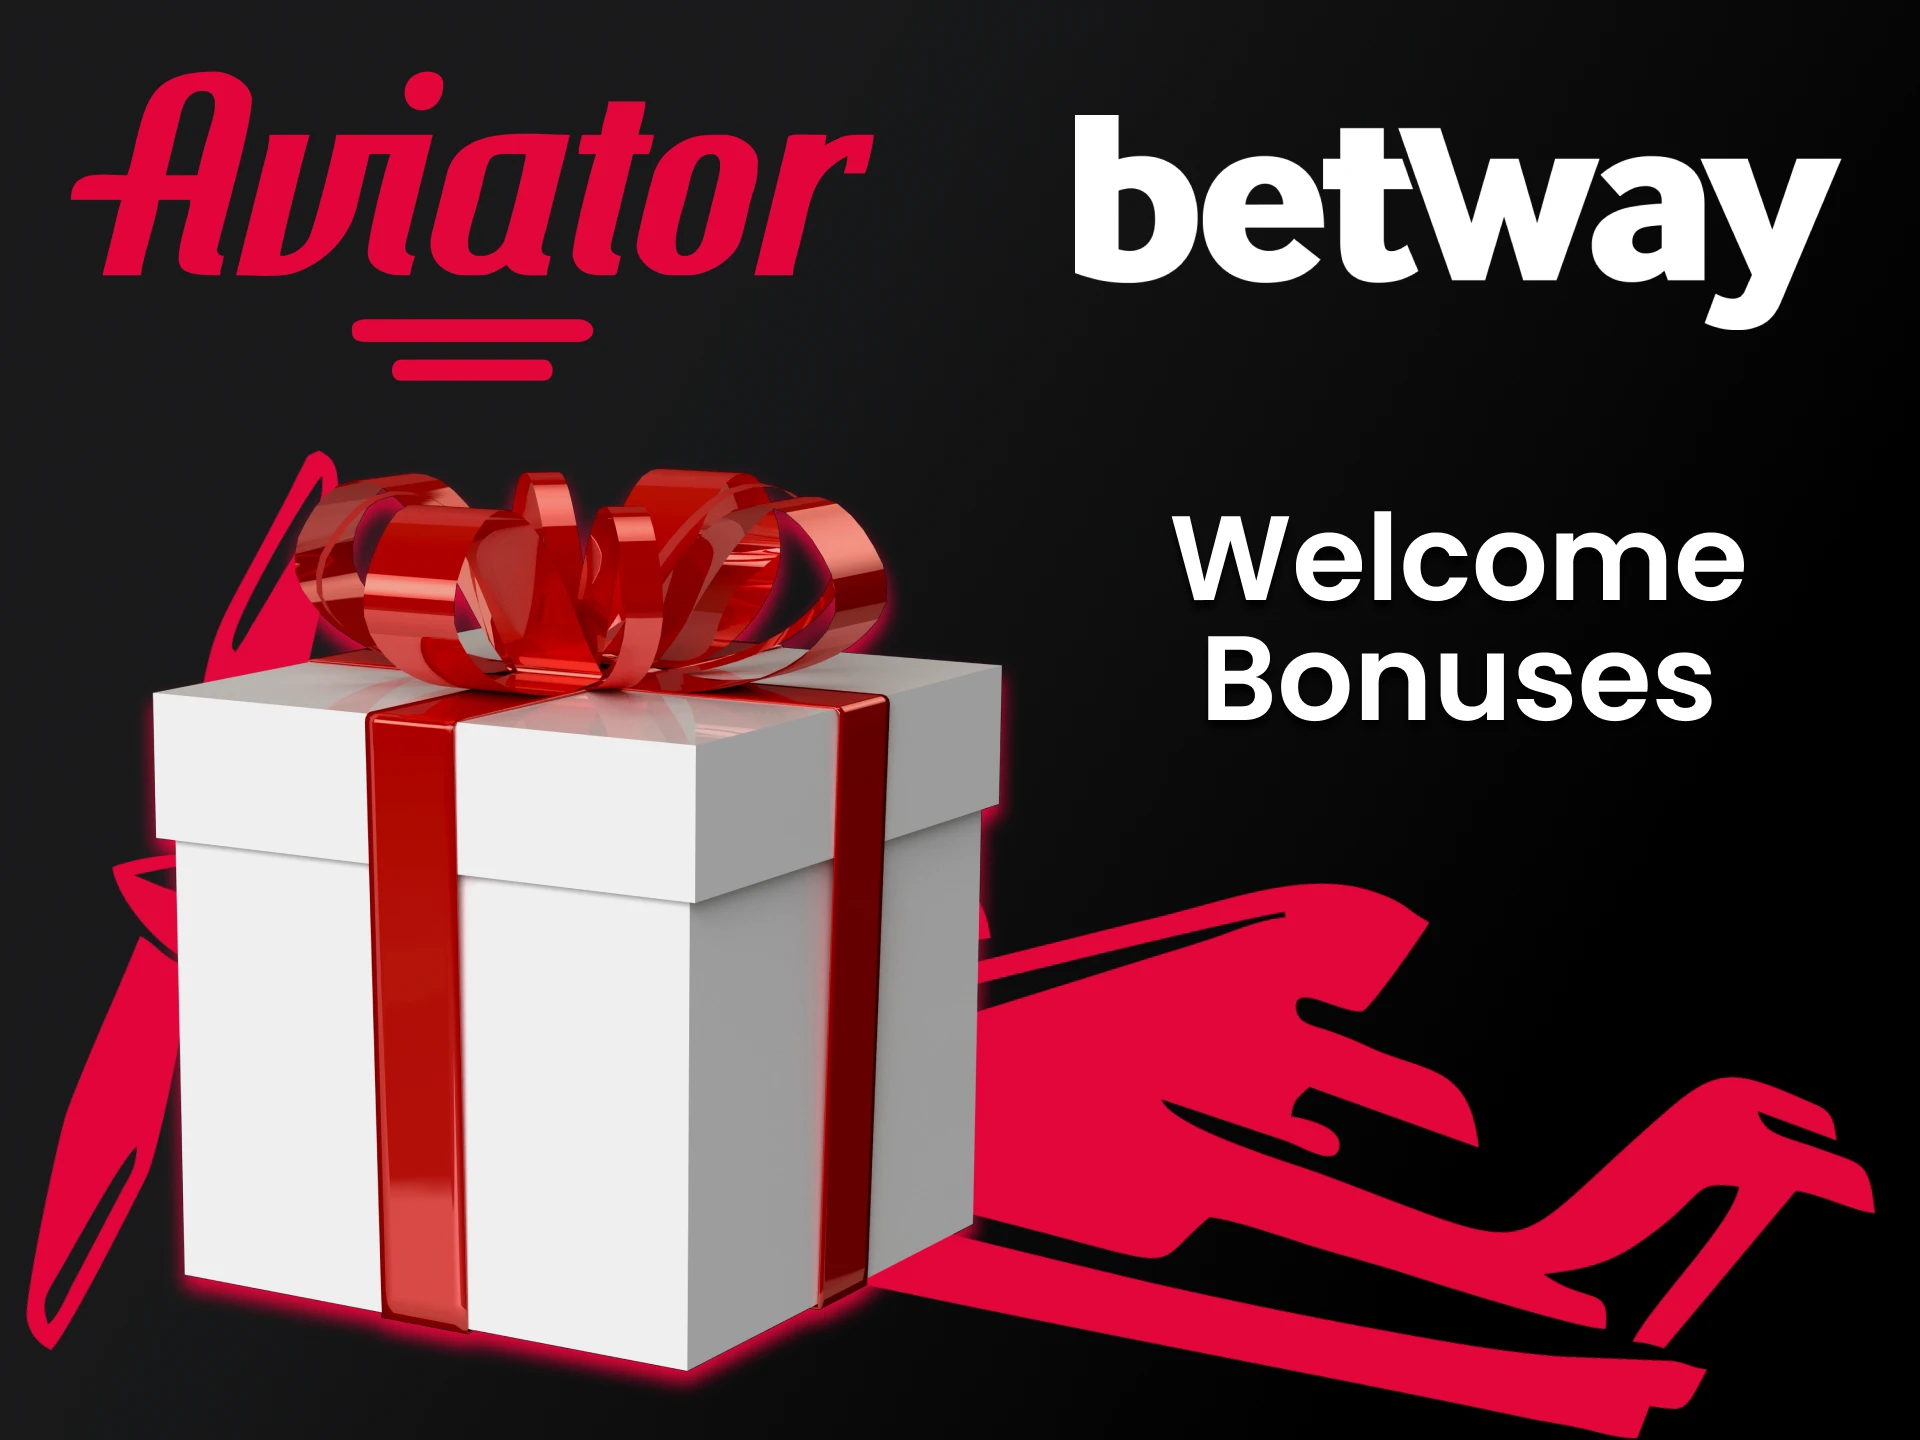 To play Aviator you will receive a bonus from Betway.